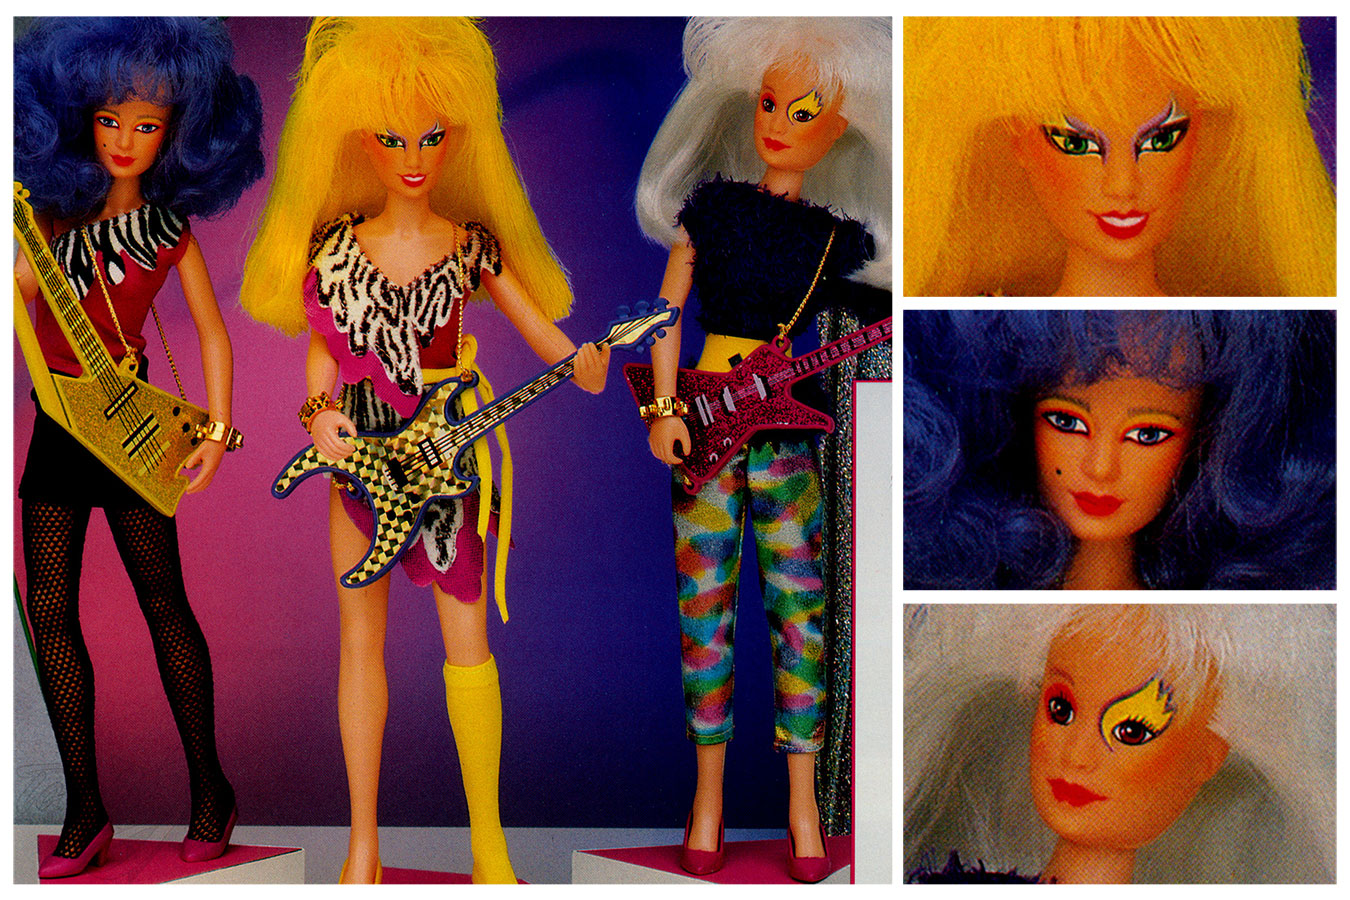 The Misfits 4010, Pizzazz, Stormer, and Roxy 1986 -- images from 1986 Hasbro Toy Fair Catalog